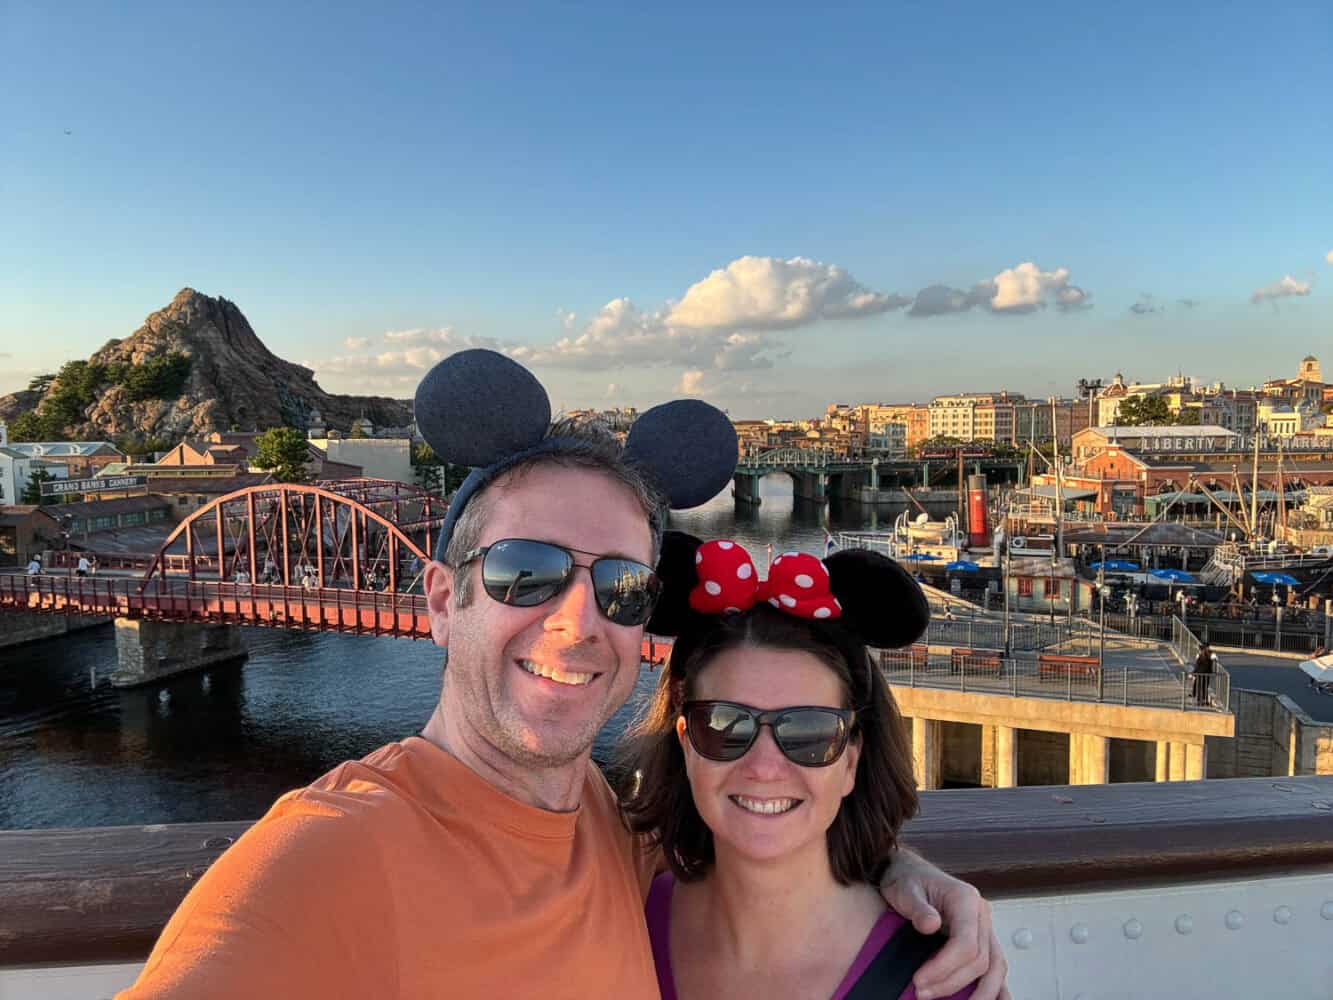 Simon and Erin on the upper deck of the SS Columbia with views of DisneySea